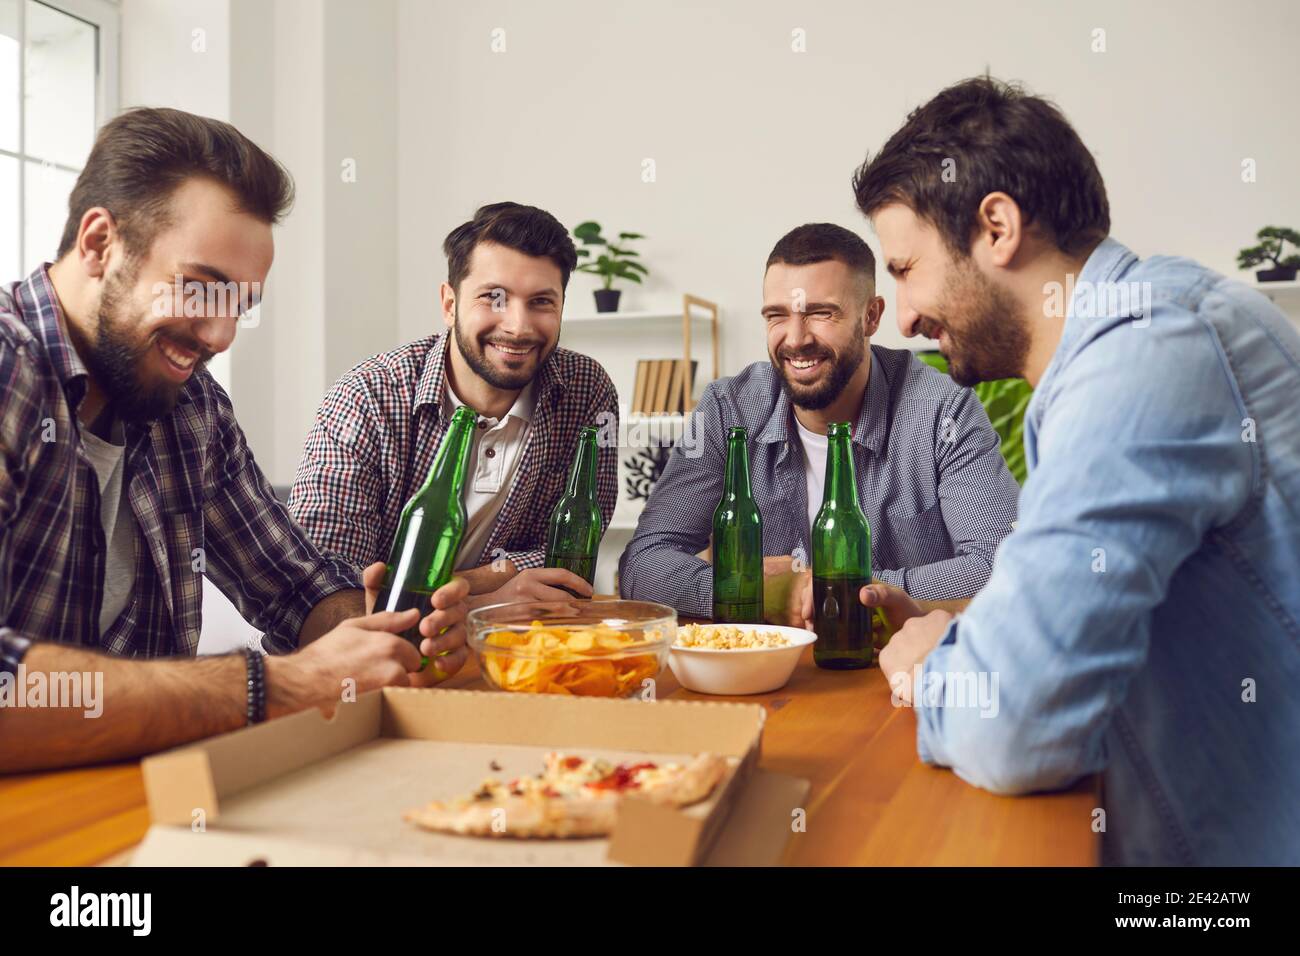 Group of friends eating pizza, drinking beer, telling jokes and having good time Stock Photo